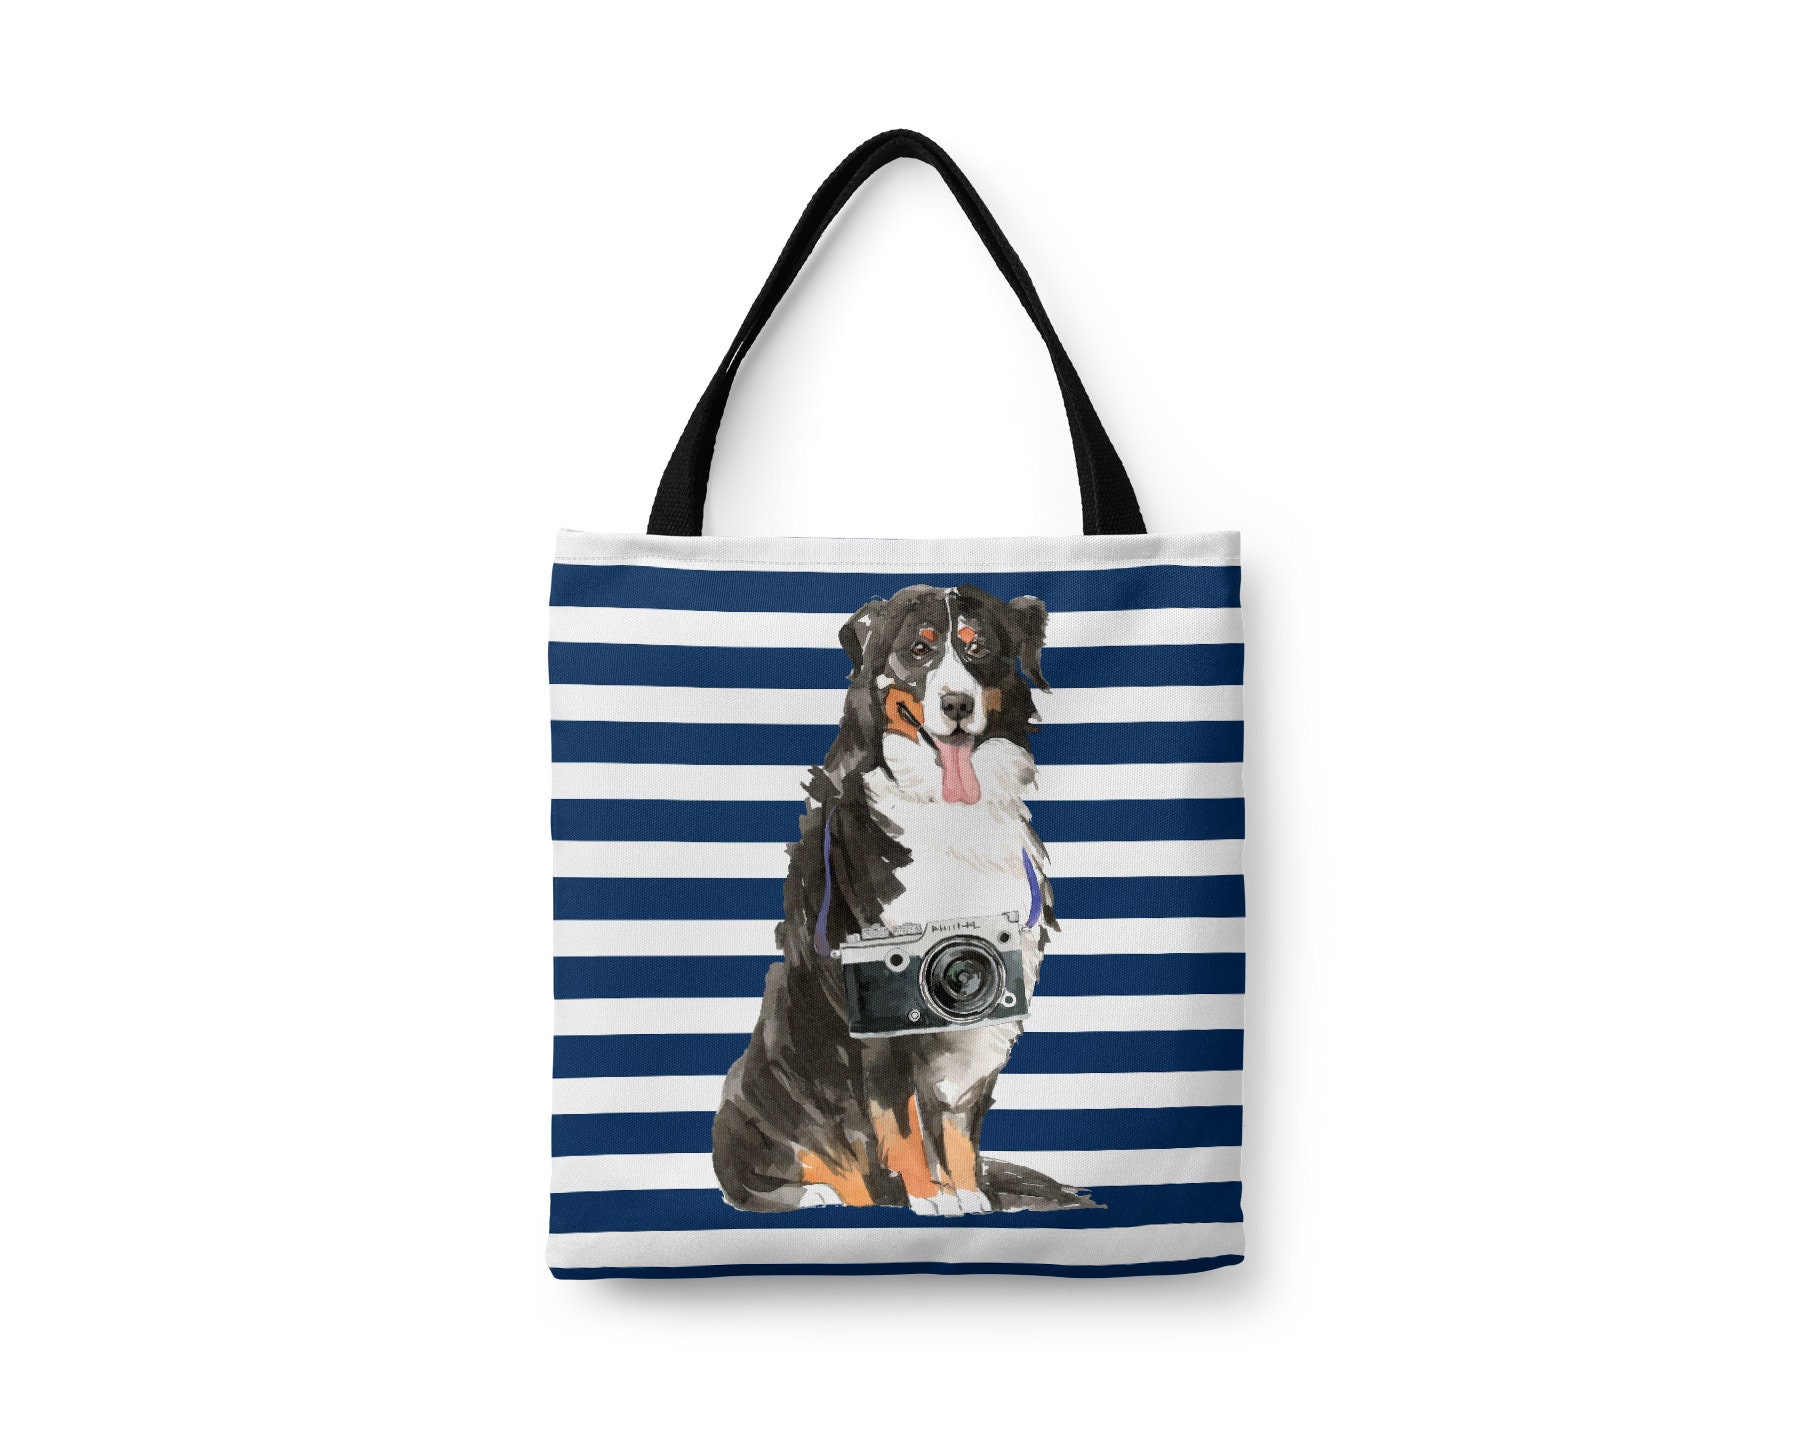 Bernese Mountain Dog Large Tote Bag - Illustrated Dogs & 6 Travel Inspired Styles. All Purpose For Work, Shopping, Life. Berner Sennenhund